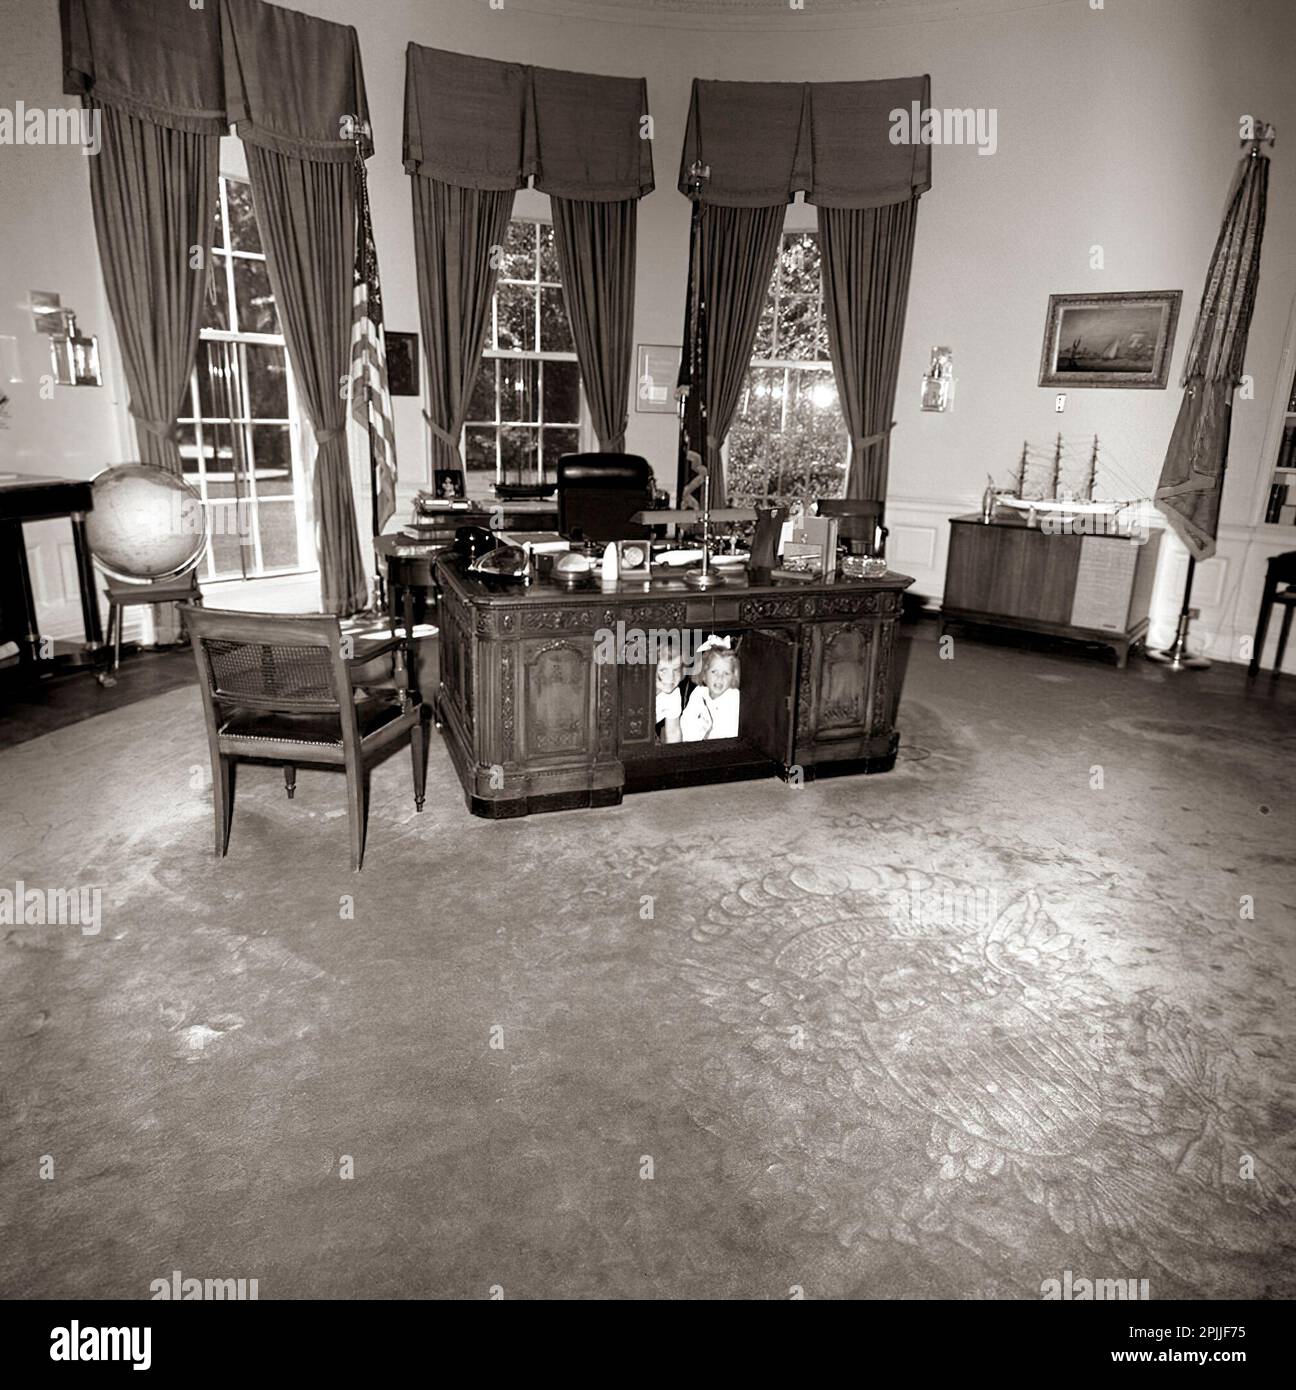 ST-C221-1-63   22 JUN 1963 President John F. Kennedy's daughter Caroline and a friend  under the President's desk in the Oval Office at the White House.    Please credit 'Cecil Stoughton (Harold Sellers). White House Photographs. John F. Kennedy Presidential Library and Museum, Boston' Stock Photo